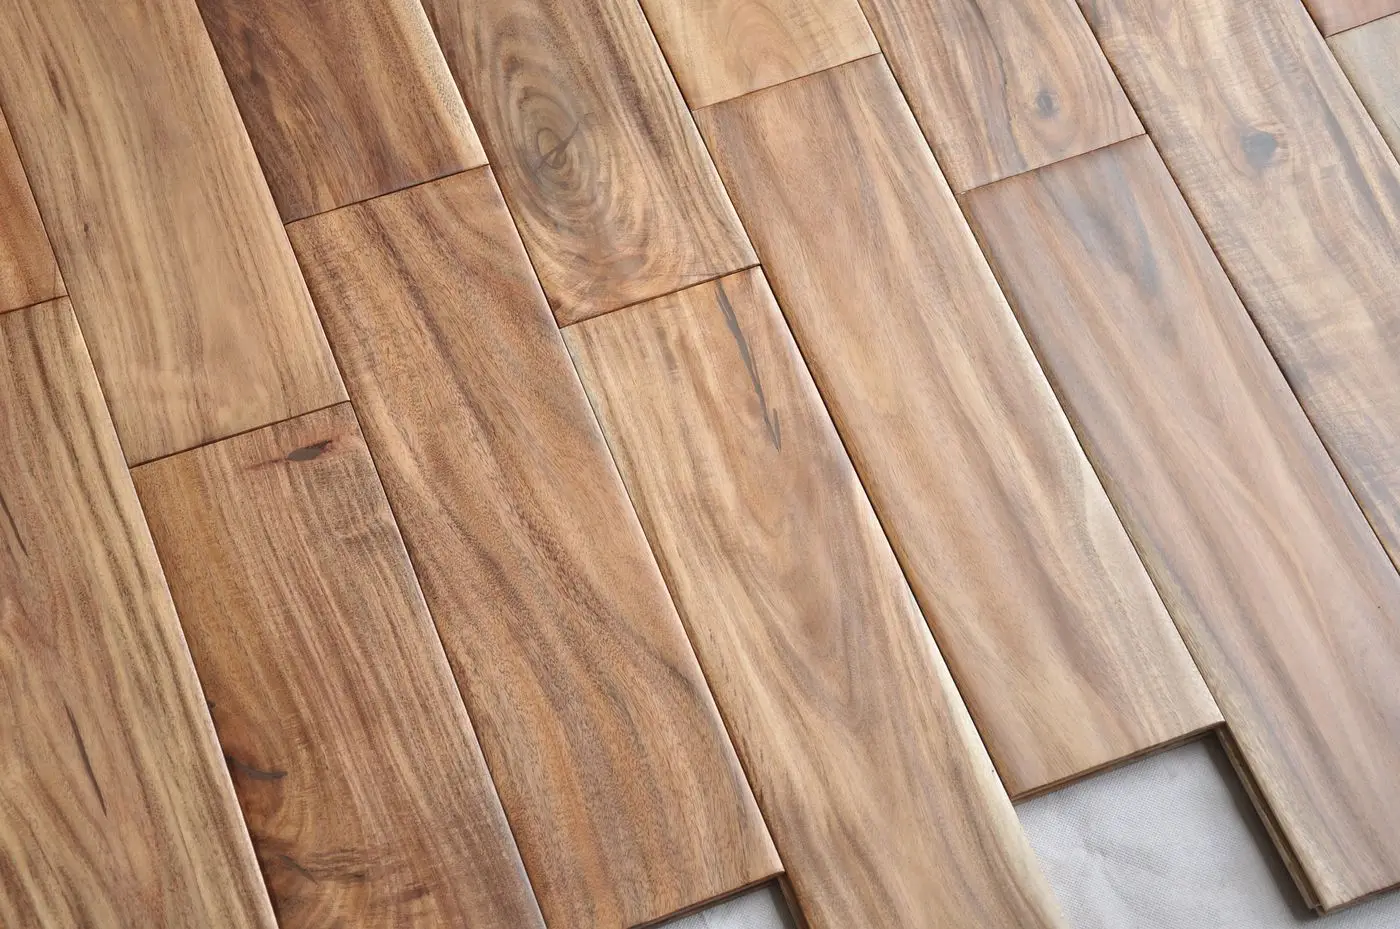 Acacia Flooring And Hot Sale Wood Flooring Prices 18 Mm Thickness